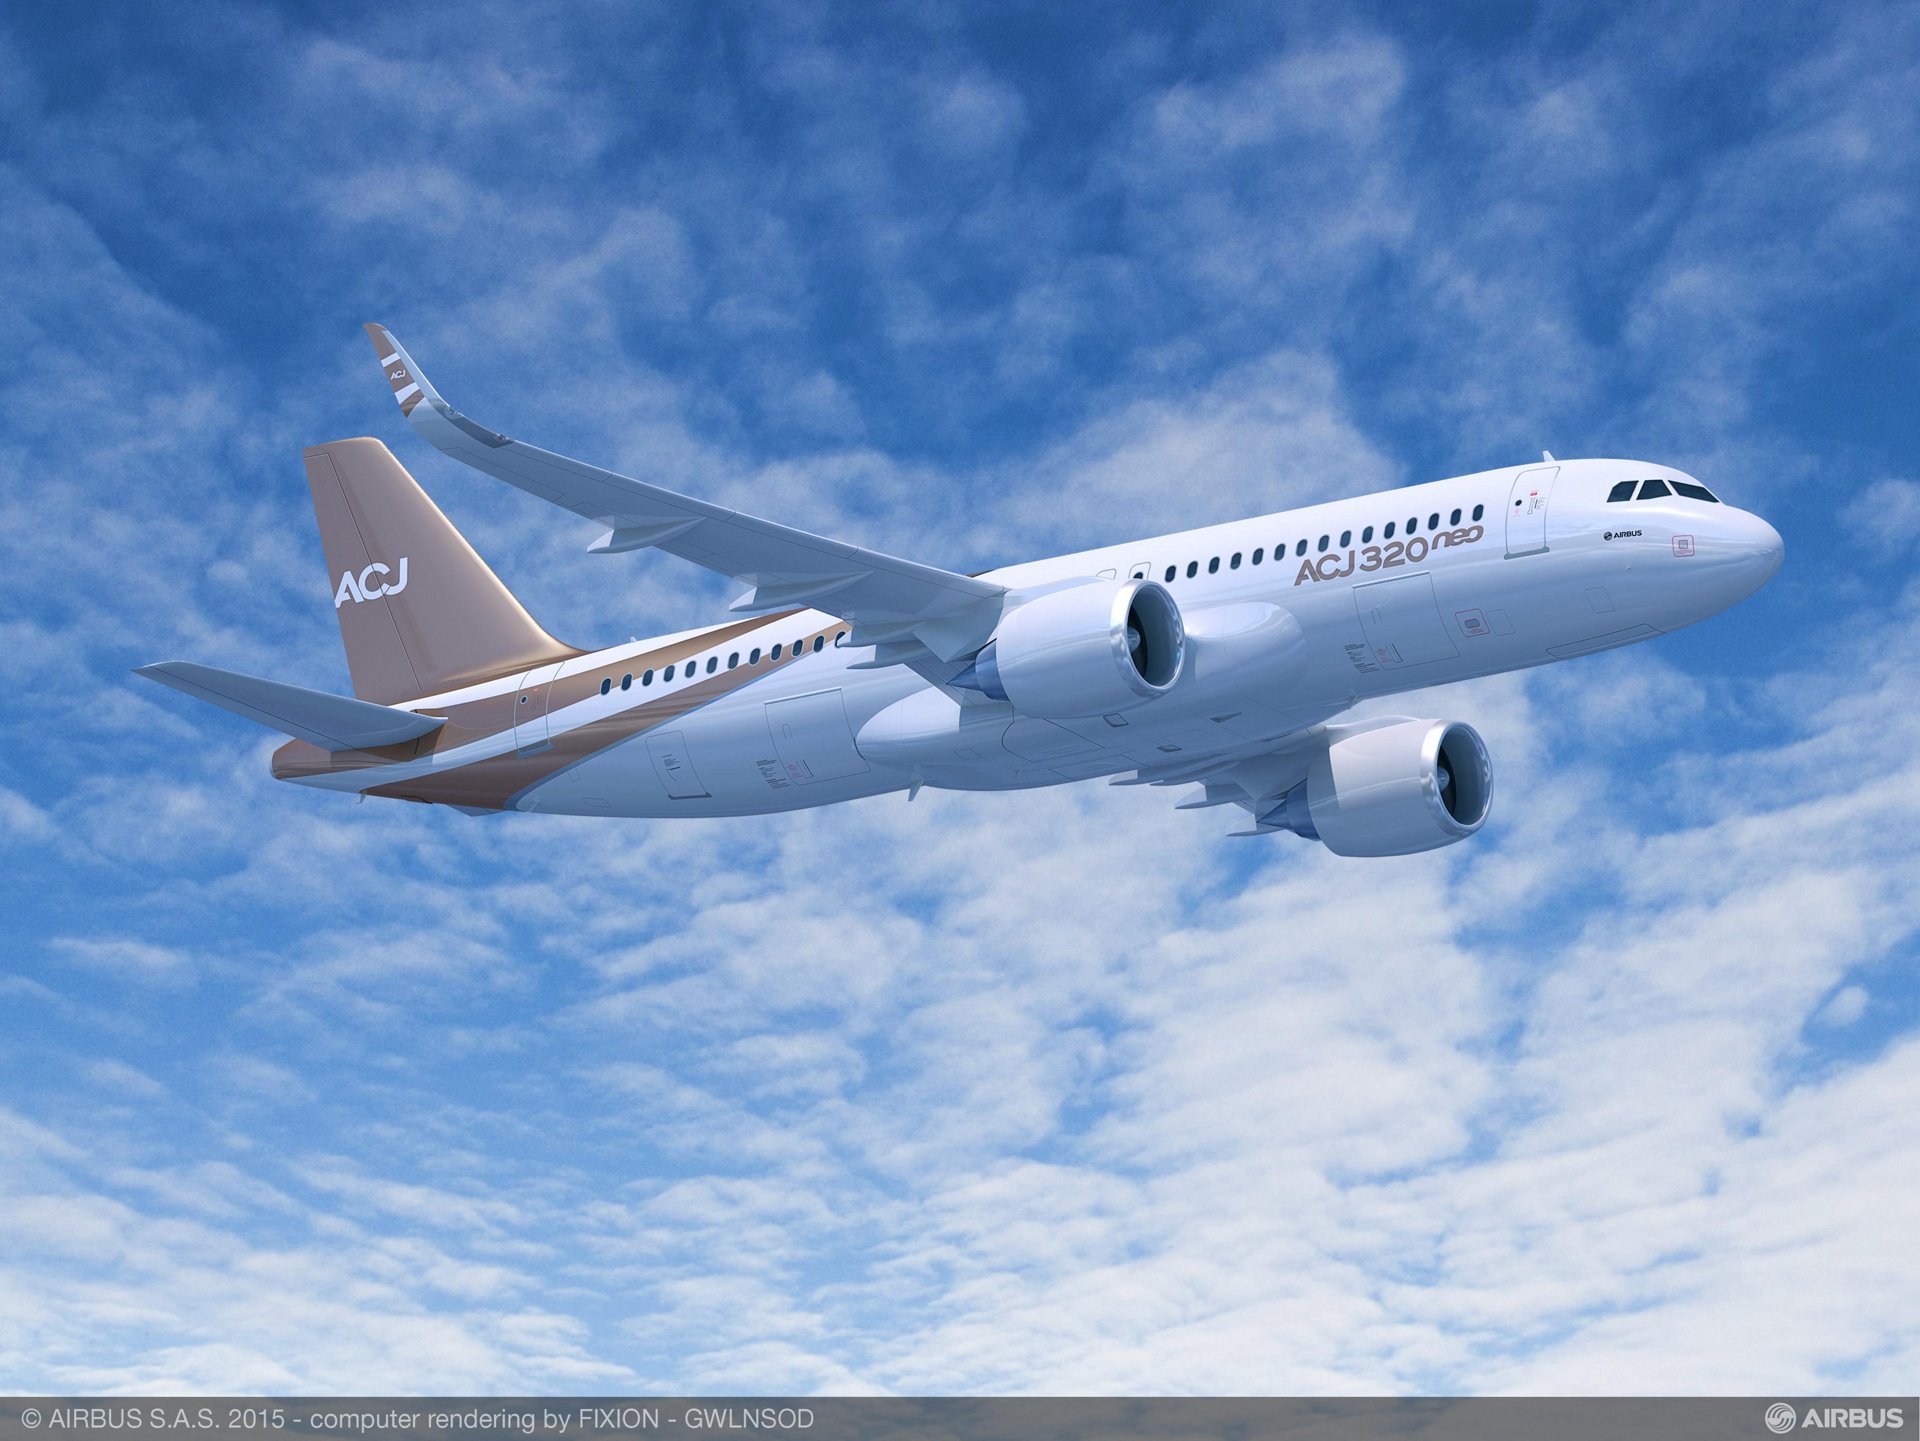 Airbus Corporate Jets wins new ACJ320neo order - Commercial Aircraft